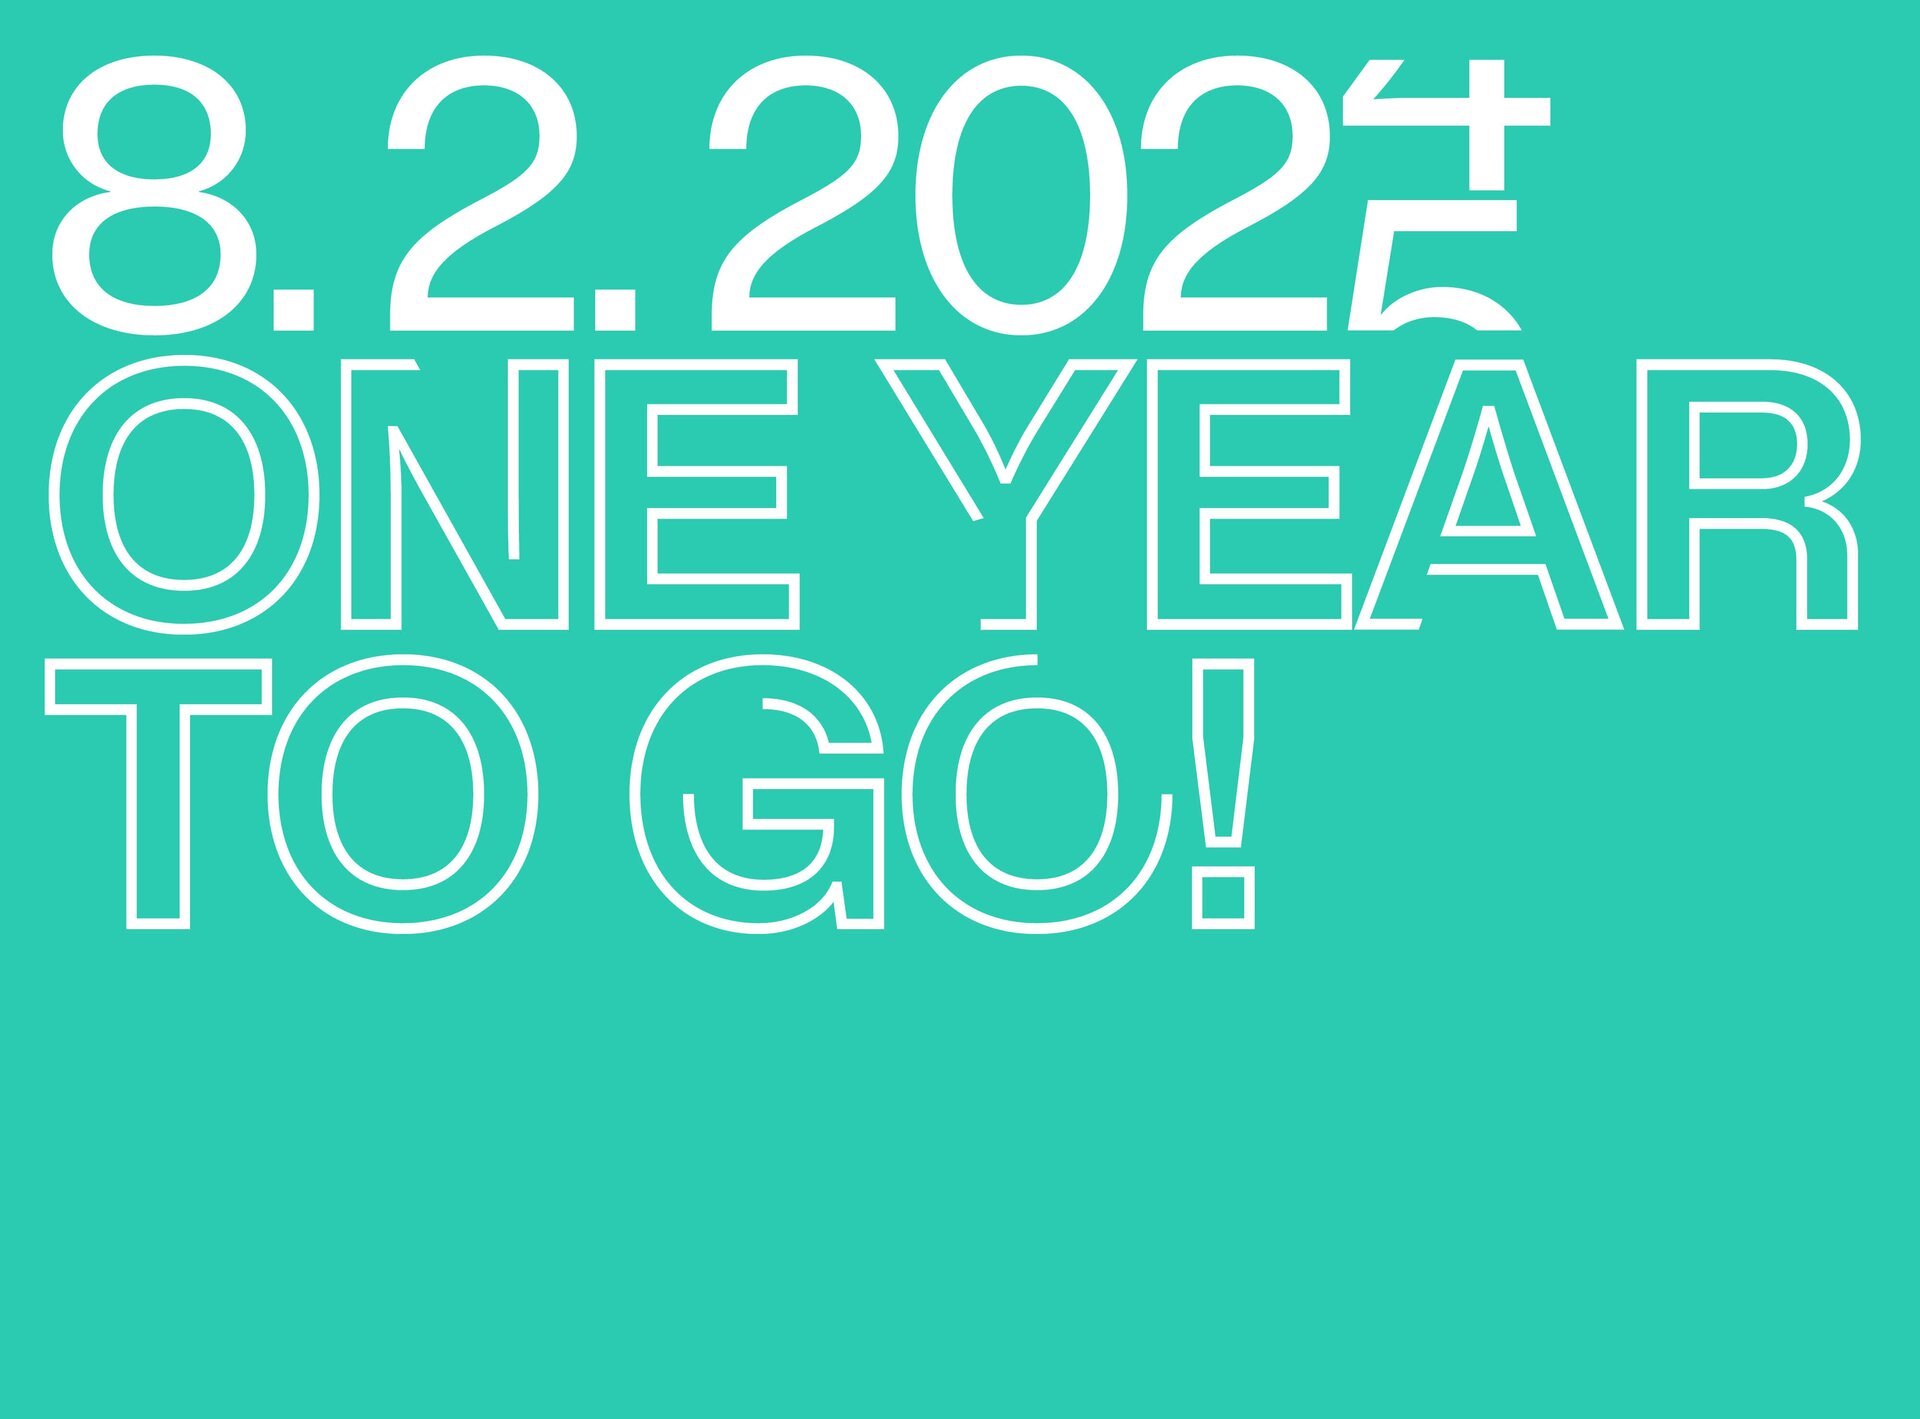  8 February 2024, one year to go! 